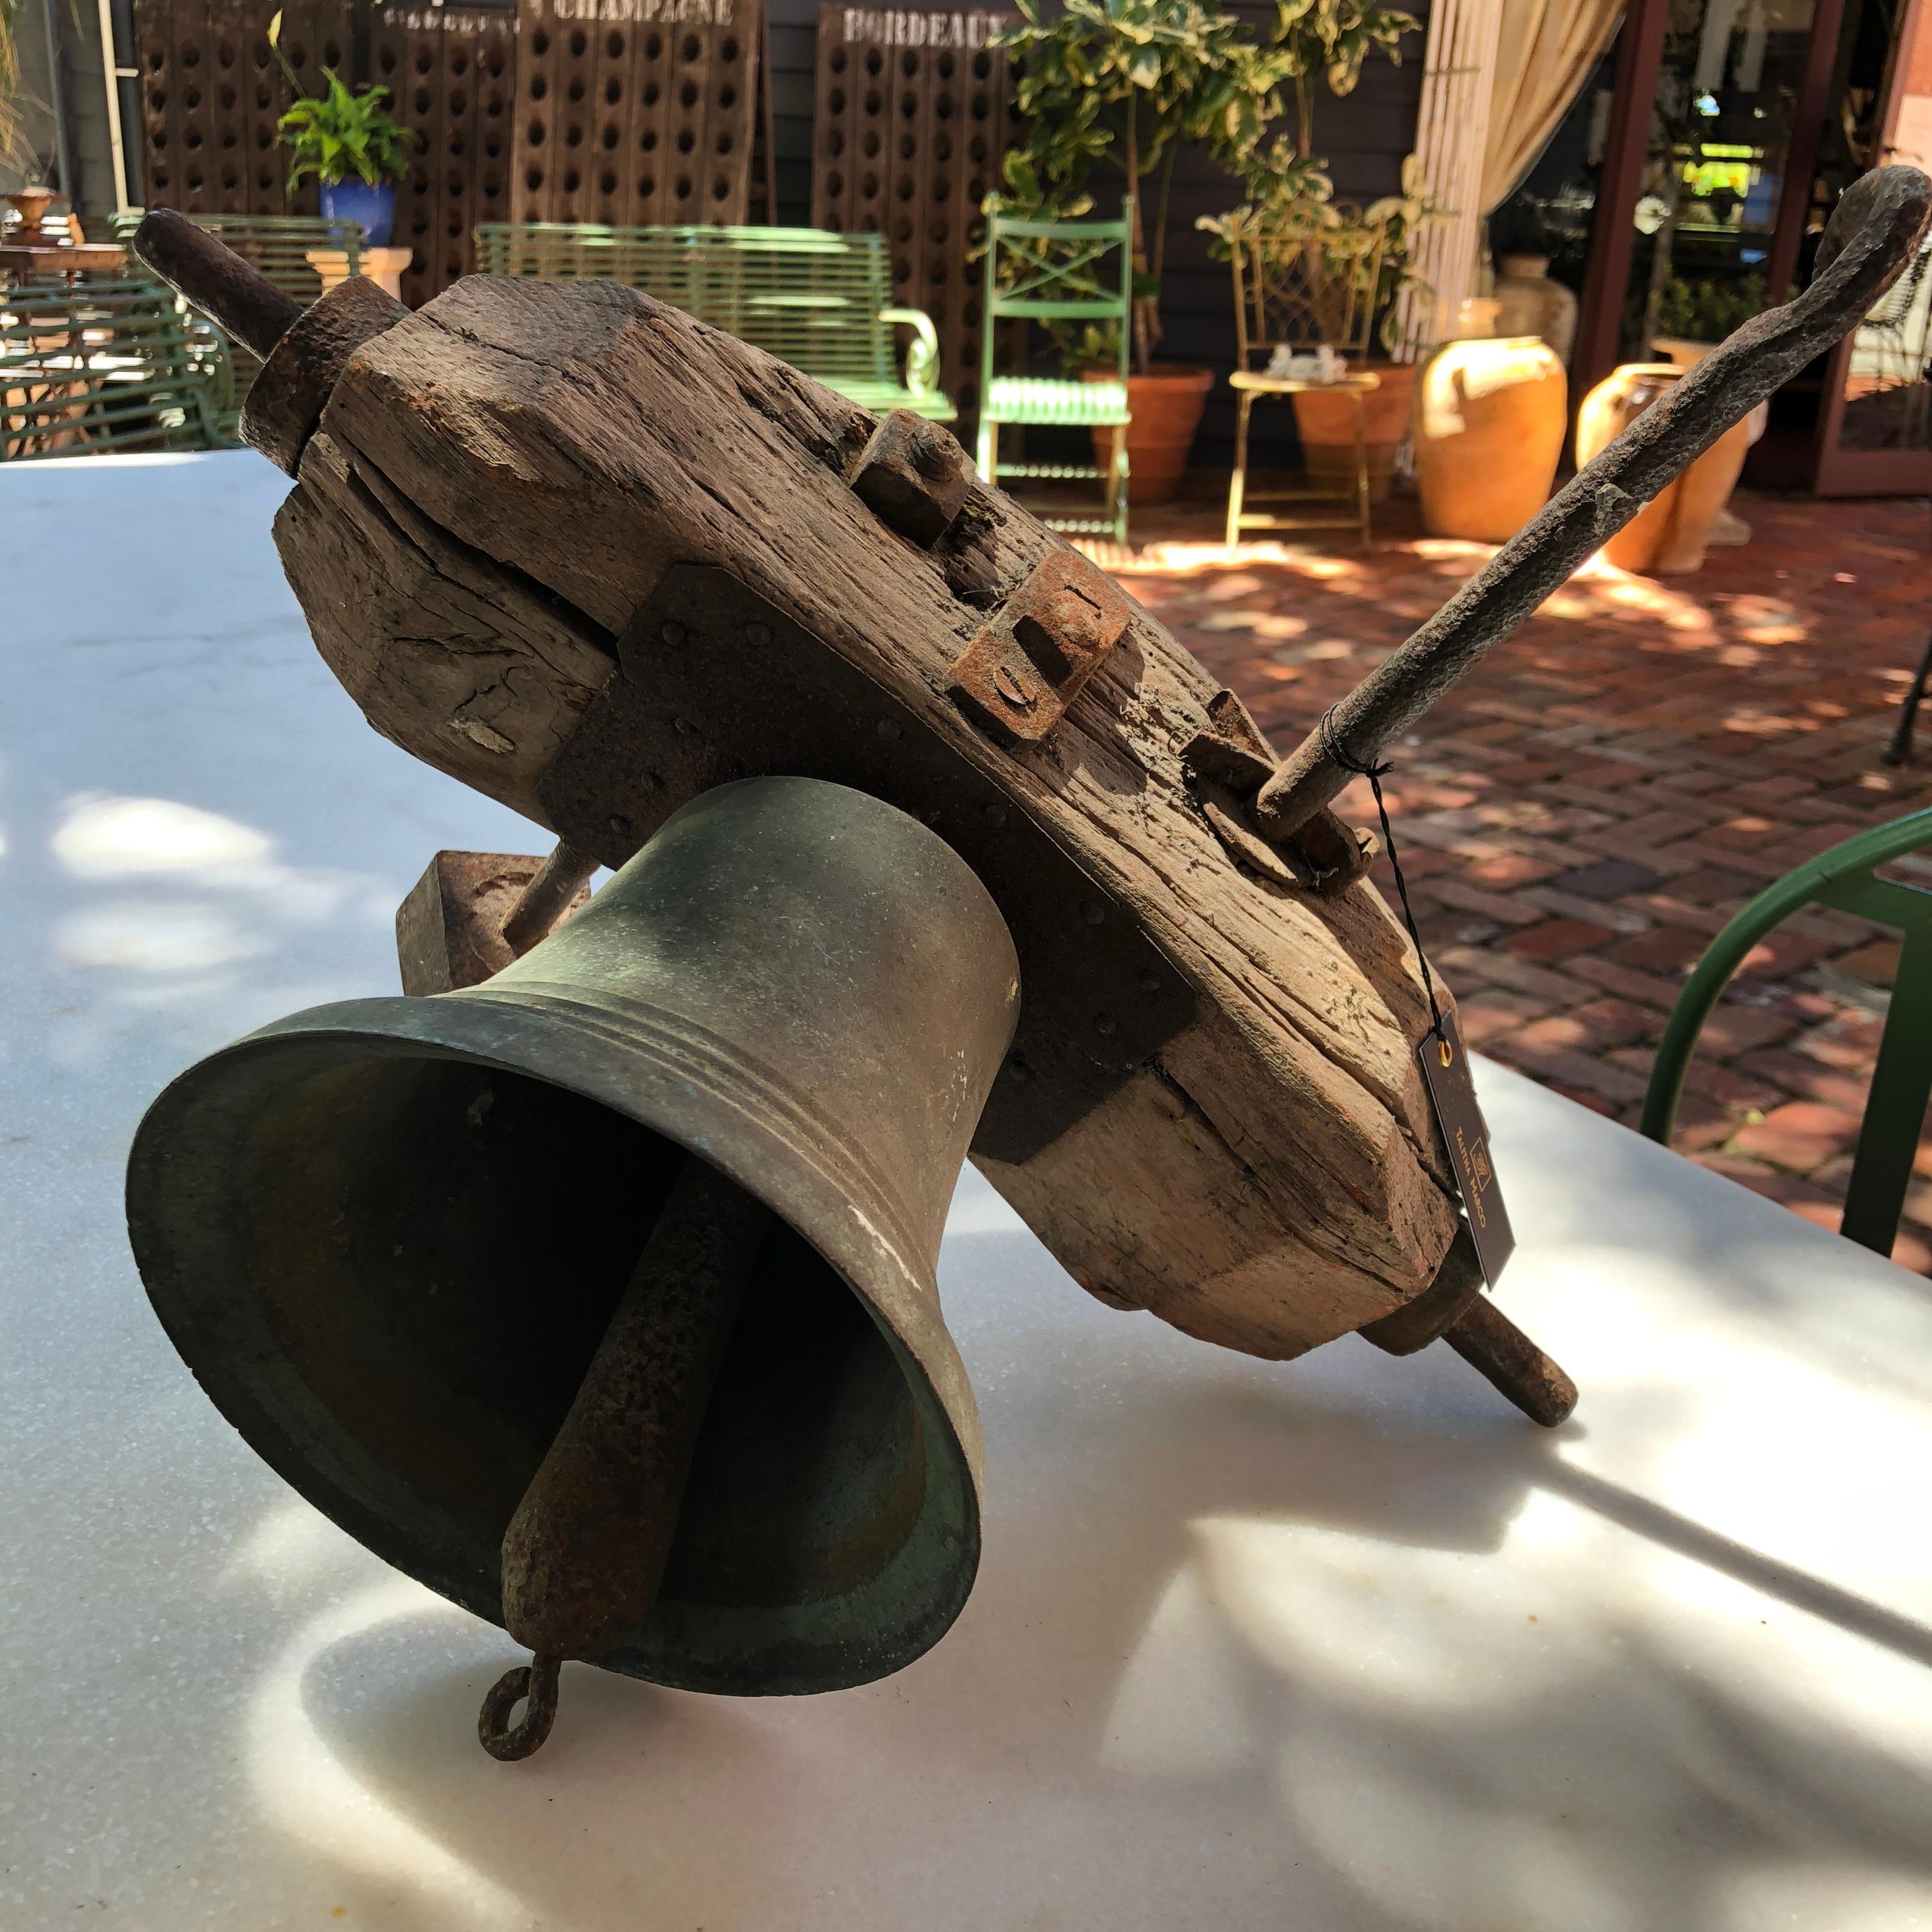 Cast 19th Century French Bronze School Bell with Wooden Beam and Original Clapper For Sale